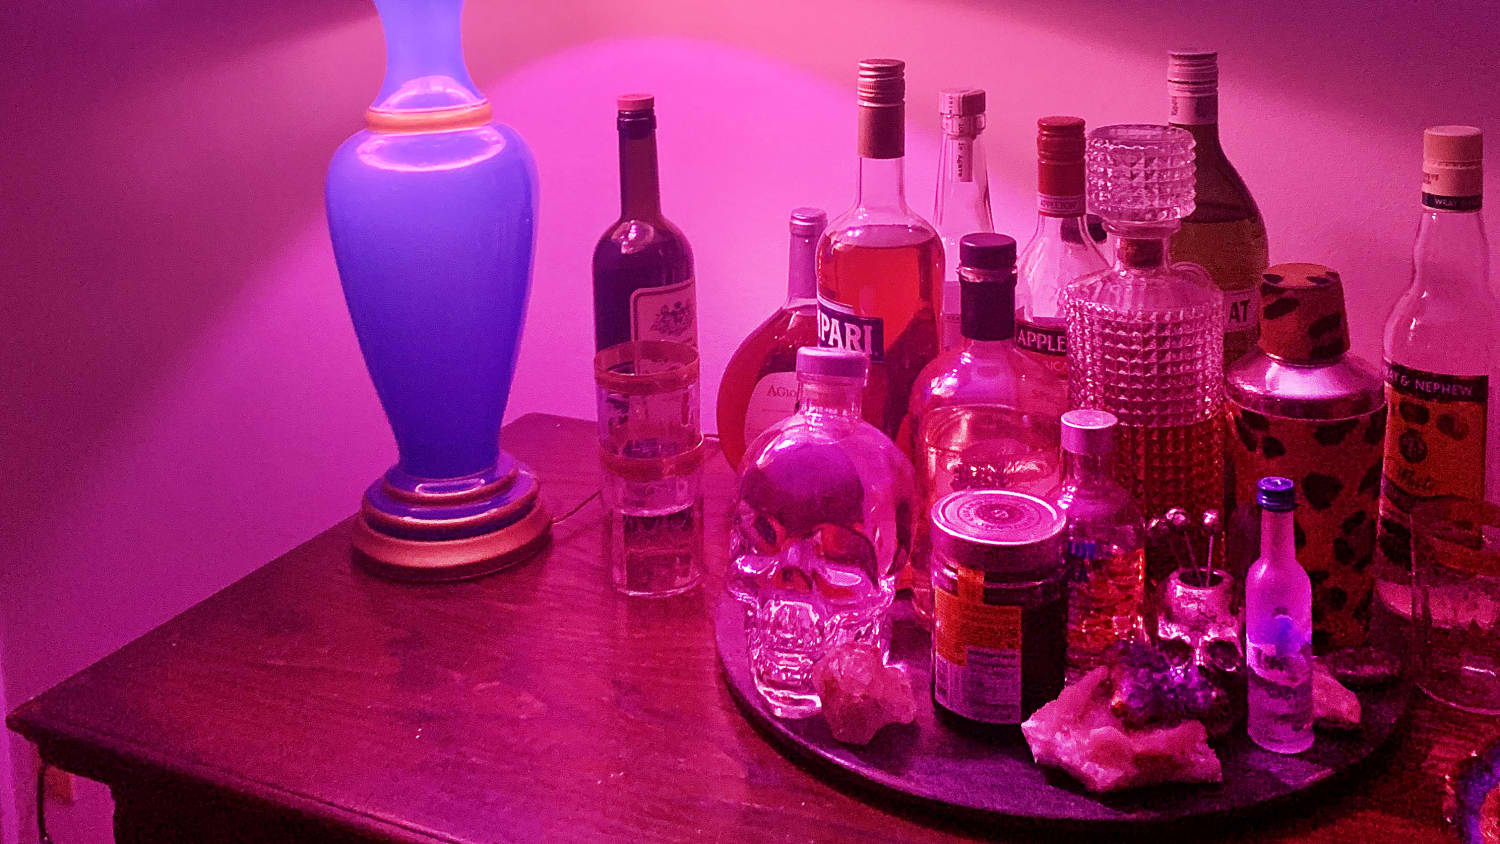 Adding Pink Lightbulbs to My Living Room Gave Me a Better Sleep Routine